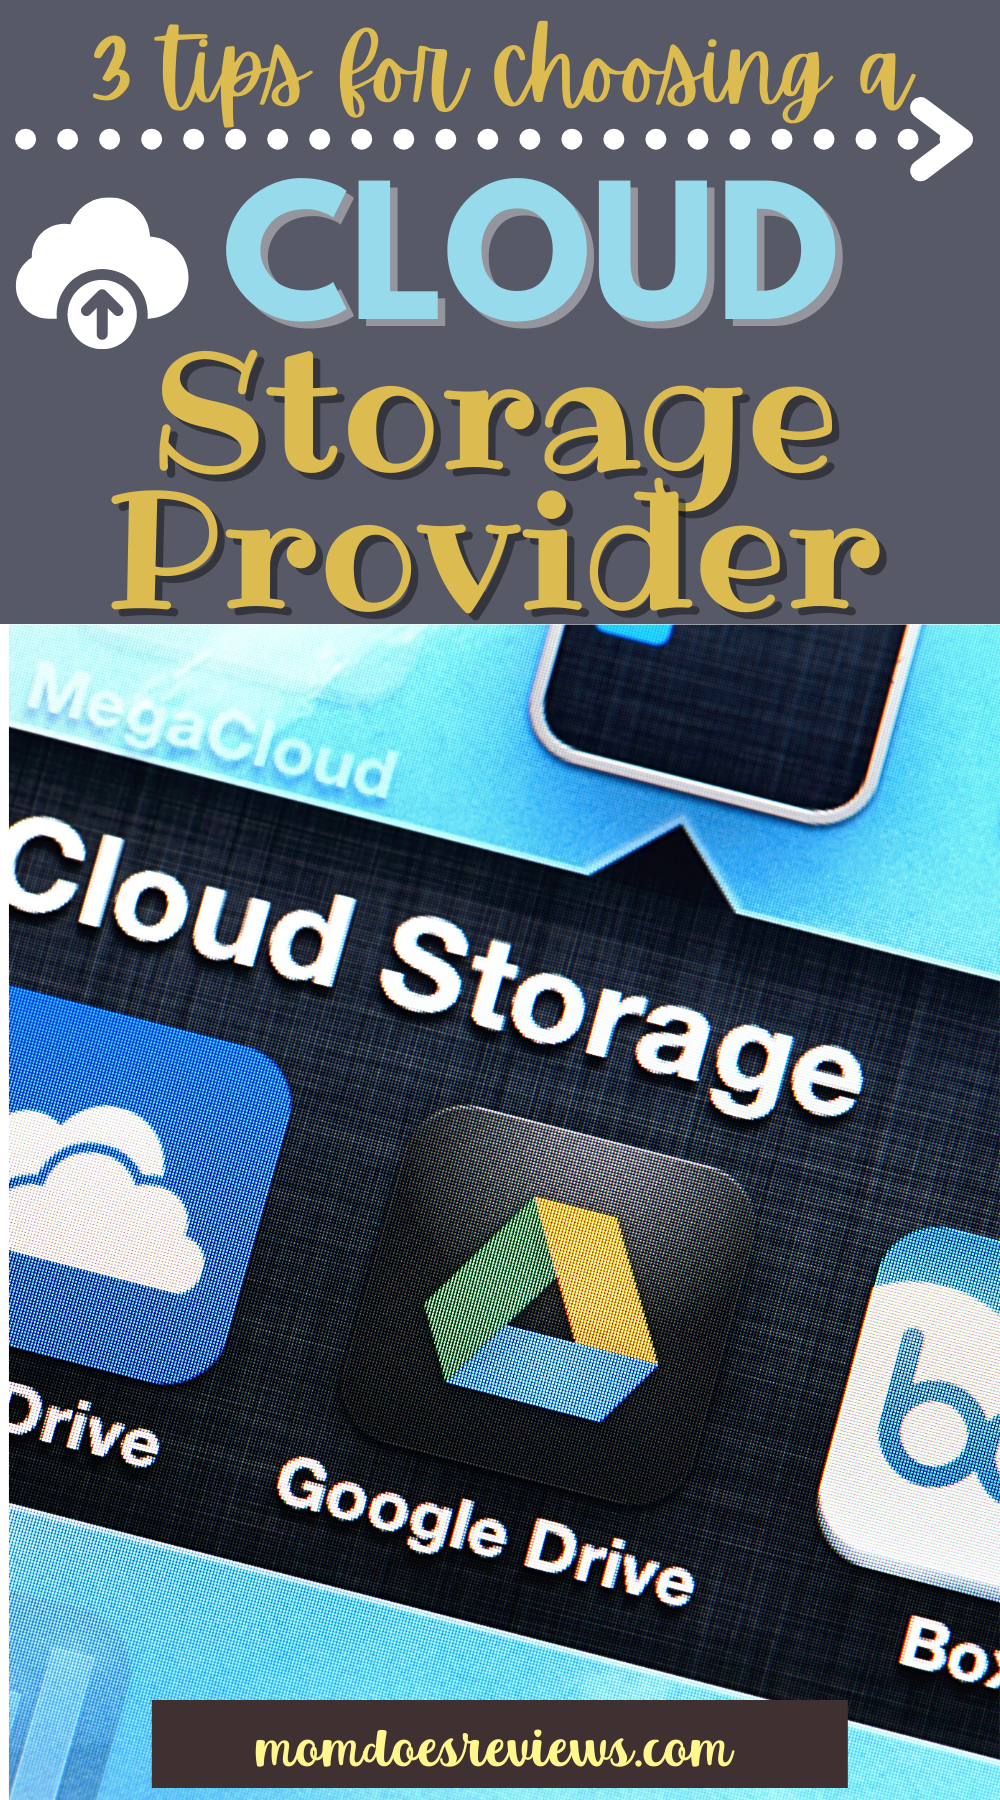 3 Tips for Choosing a Cloud Storage Provider